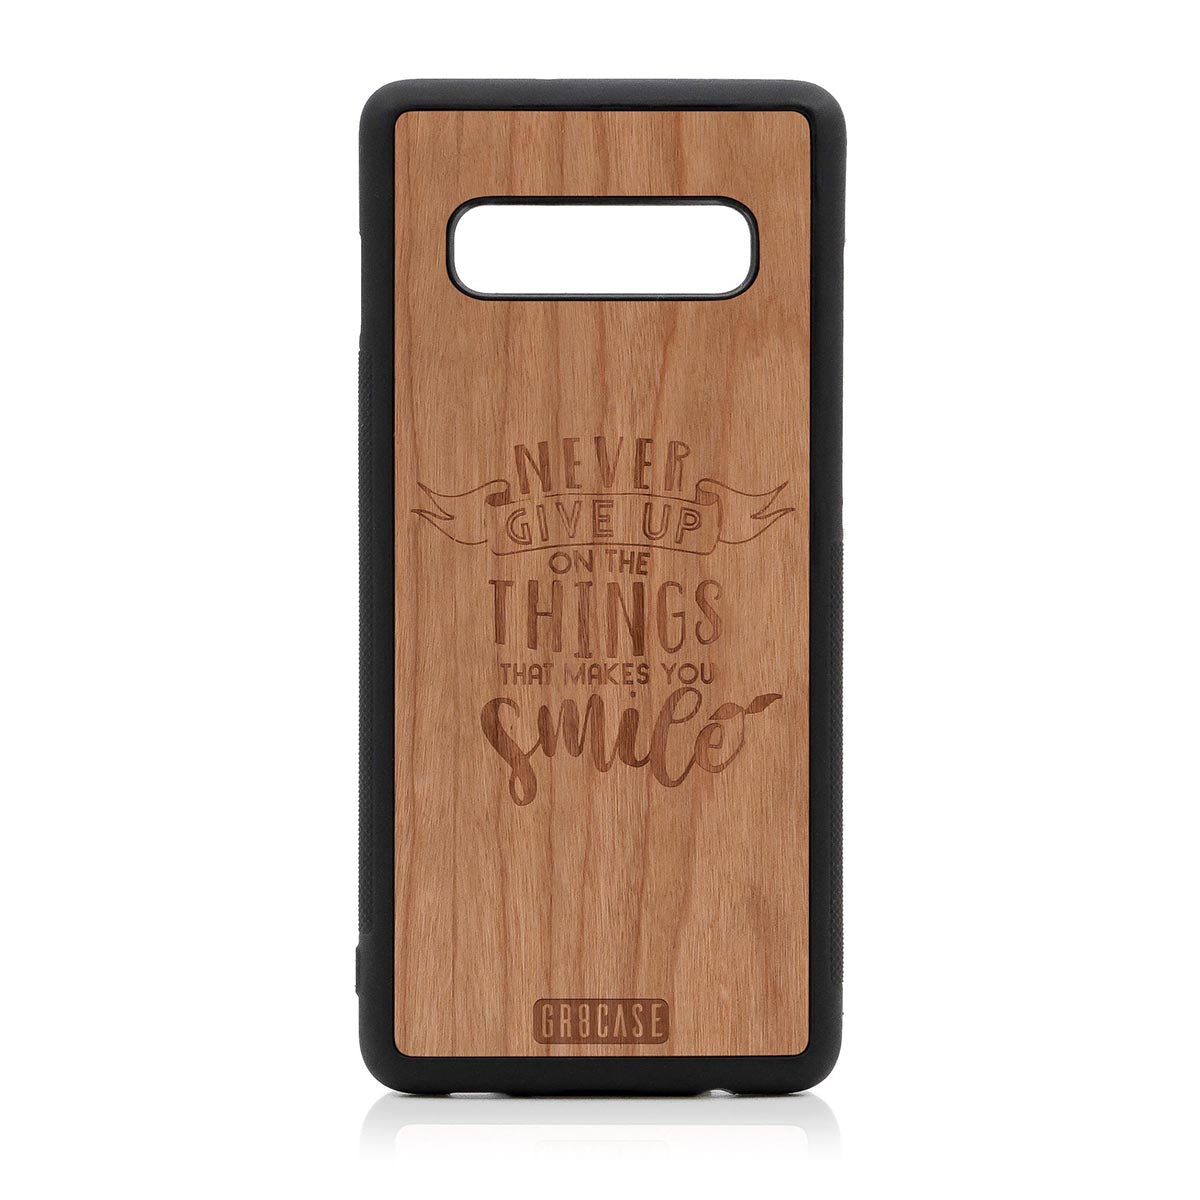 Never Give Up On The Things That Makes You Smile Design Wood Case Samsung Galaxy S10 Plus by GR8CASE